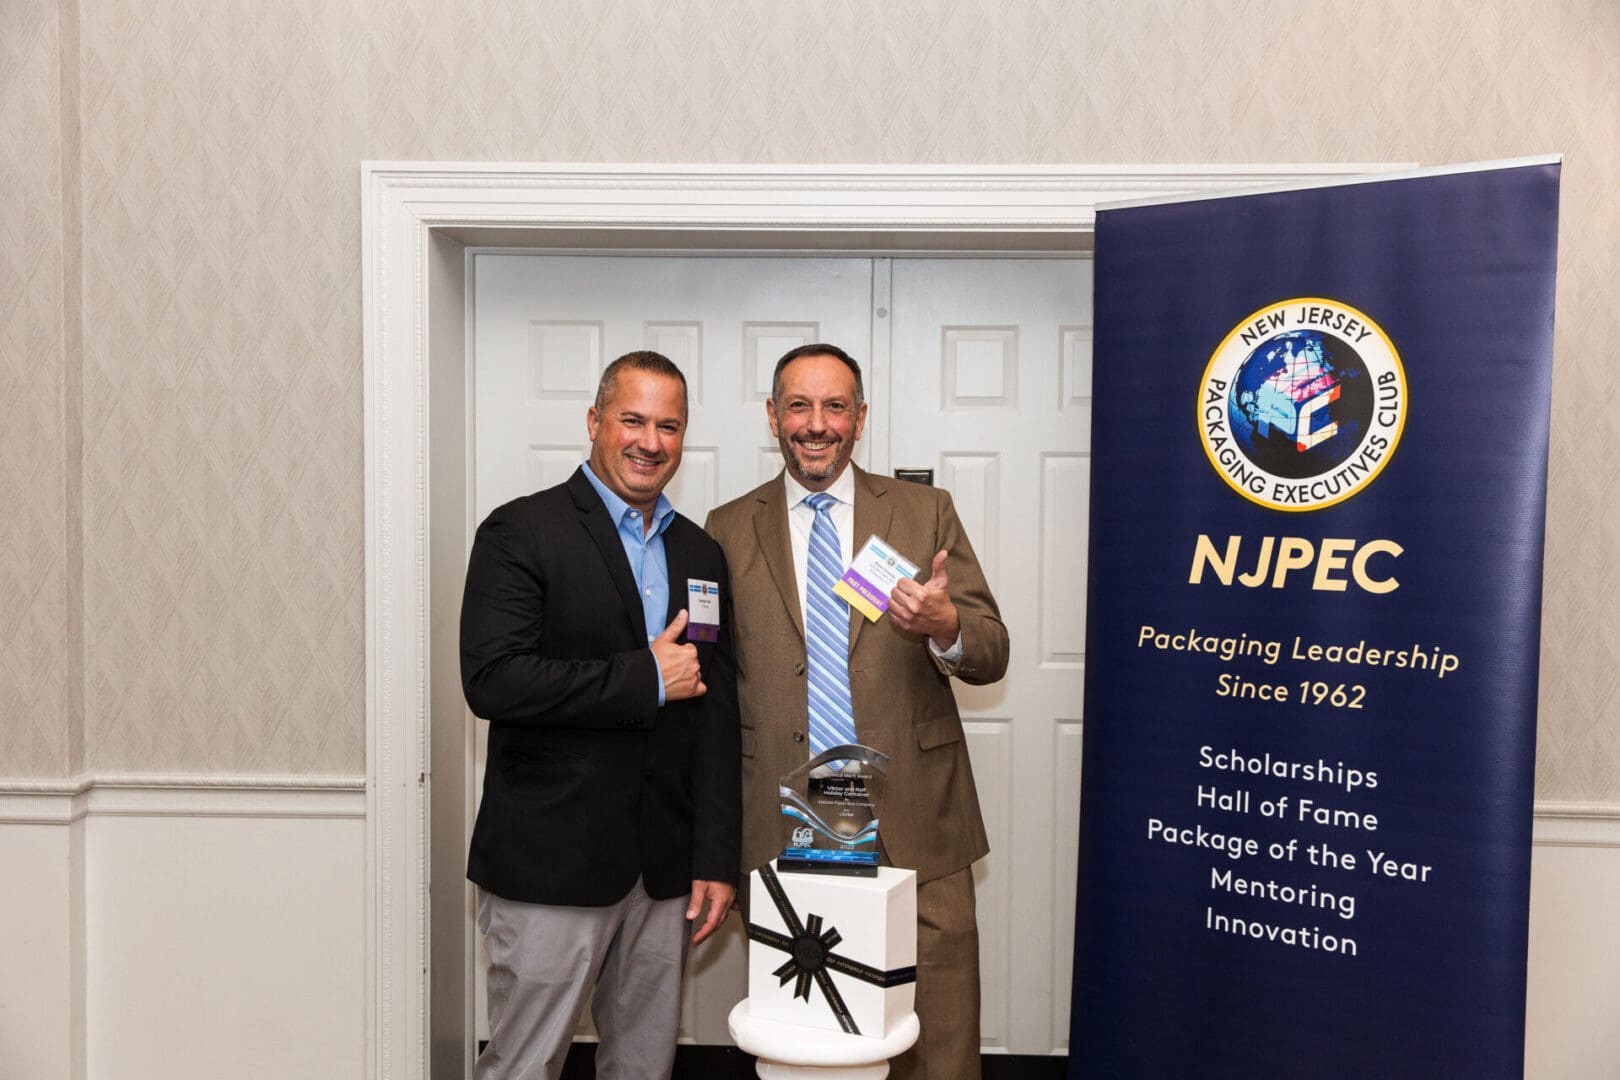 Two men standing in front of a banner with the nppc logo.